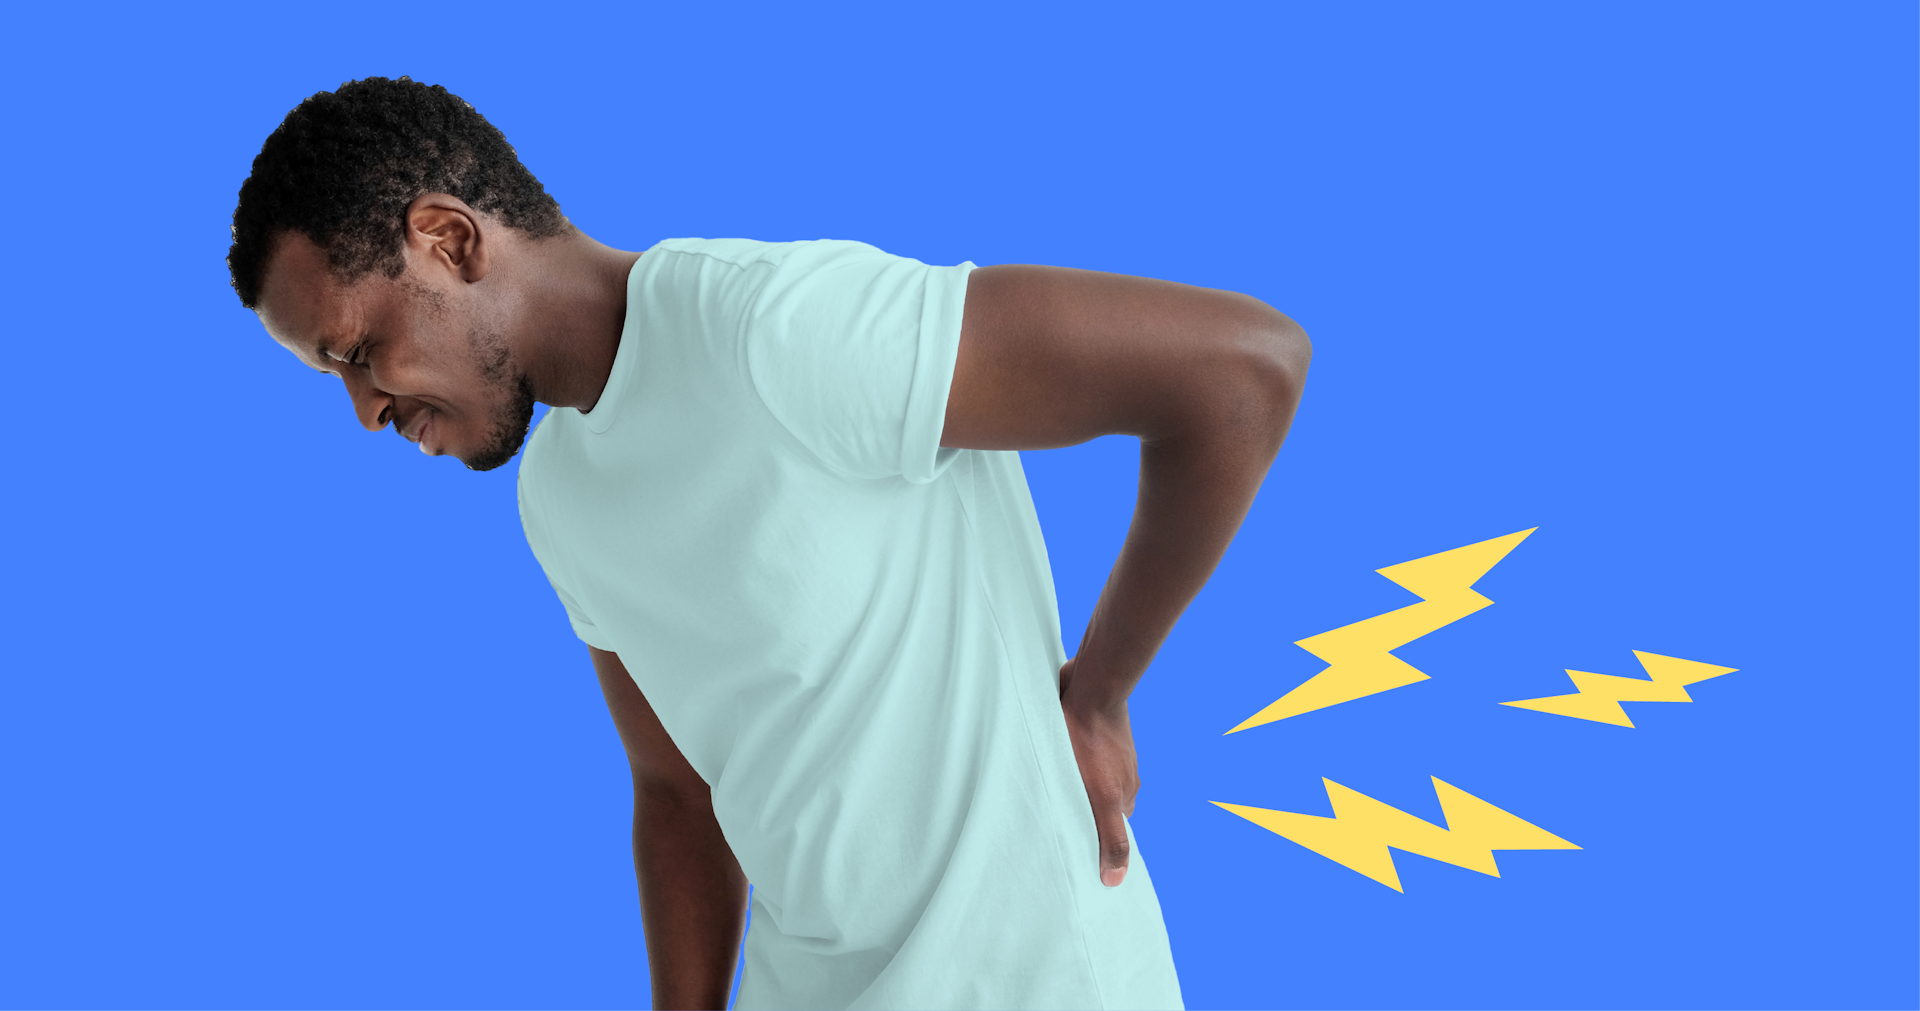 Suffering from low back pain? This blog is for you.